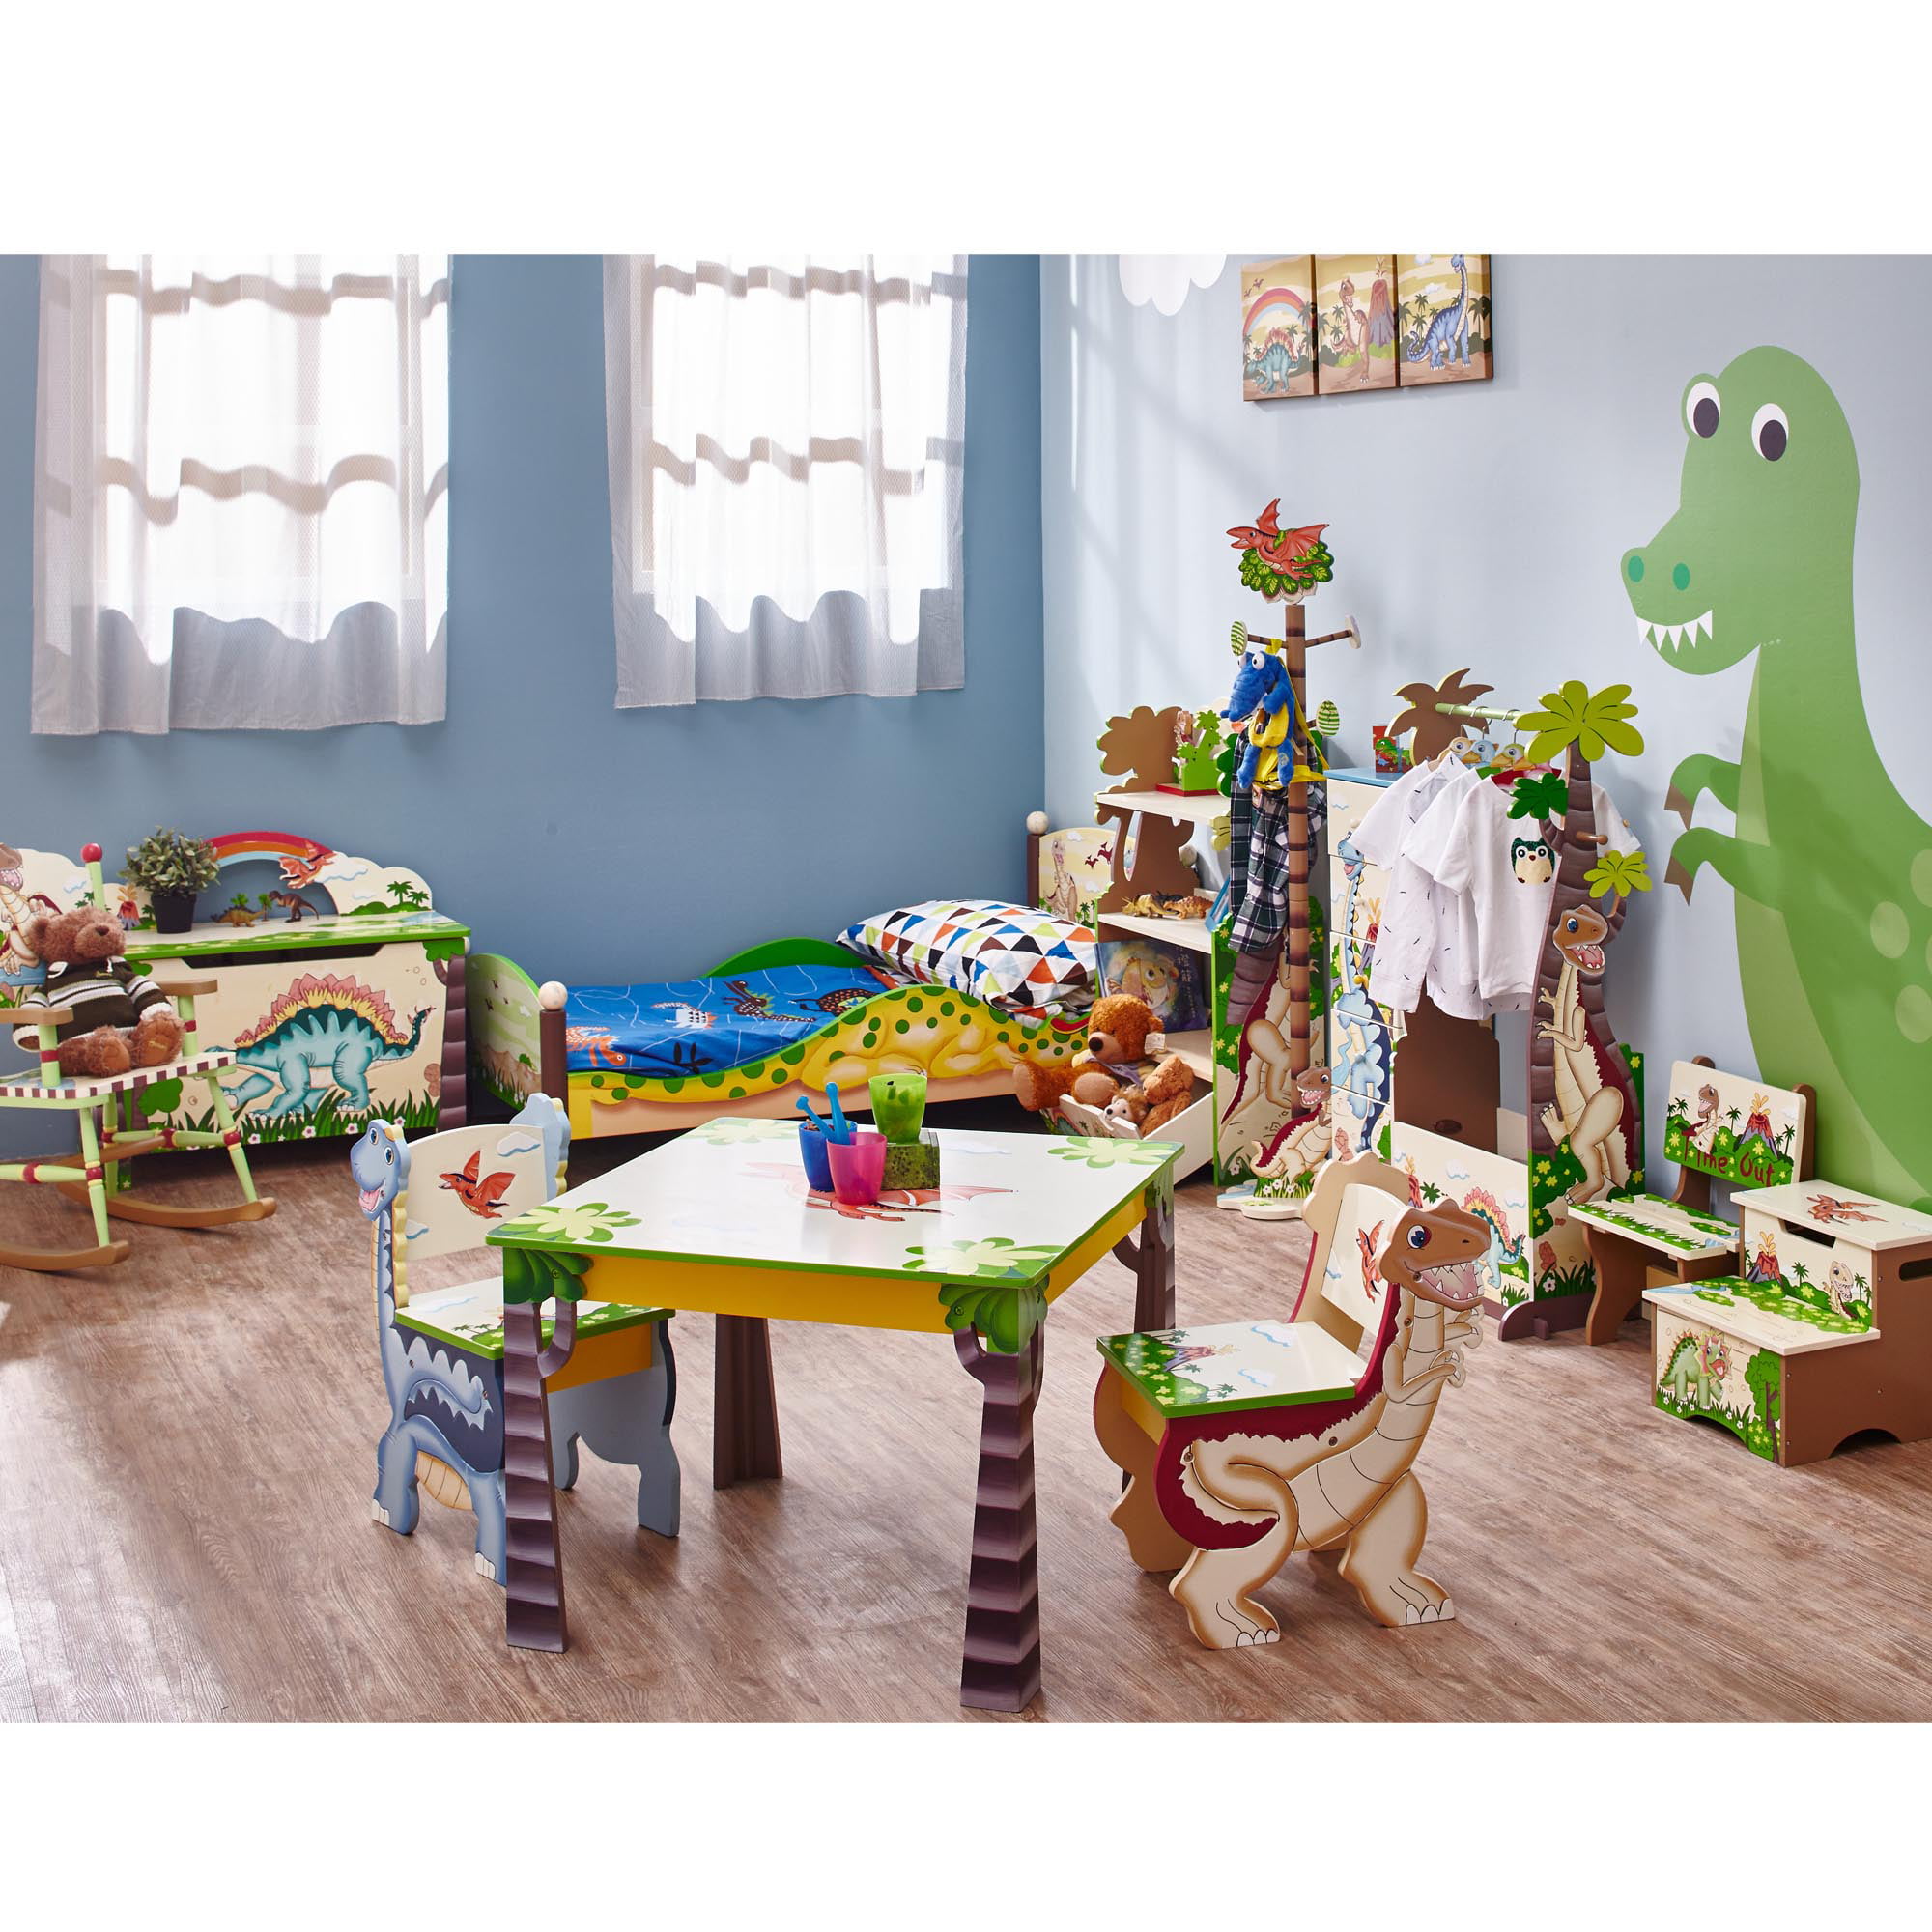 Dinosaur Kingdom Thematic Kids Wooden 2 Chairs Set  Imagination Inspiring Hand Crafted & Hand Painted Details   Non-Toxic Lead Free Water-based Paint Fantasy Fields 